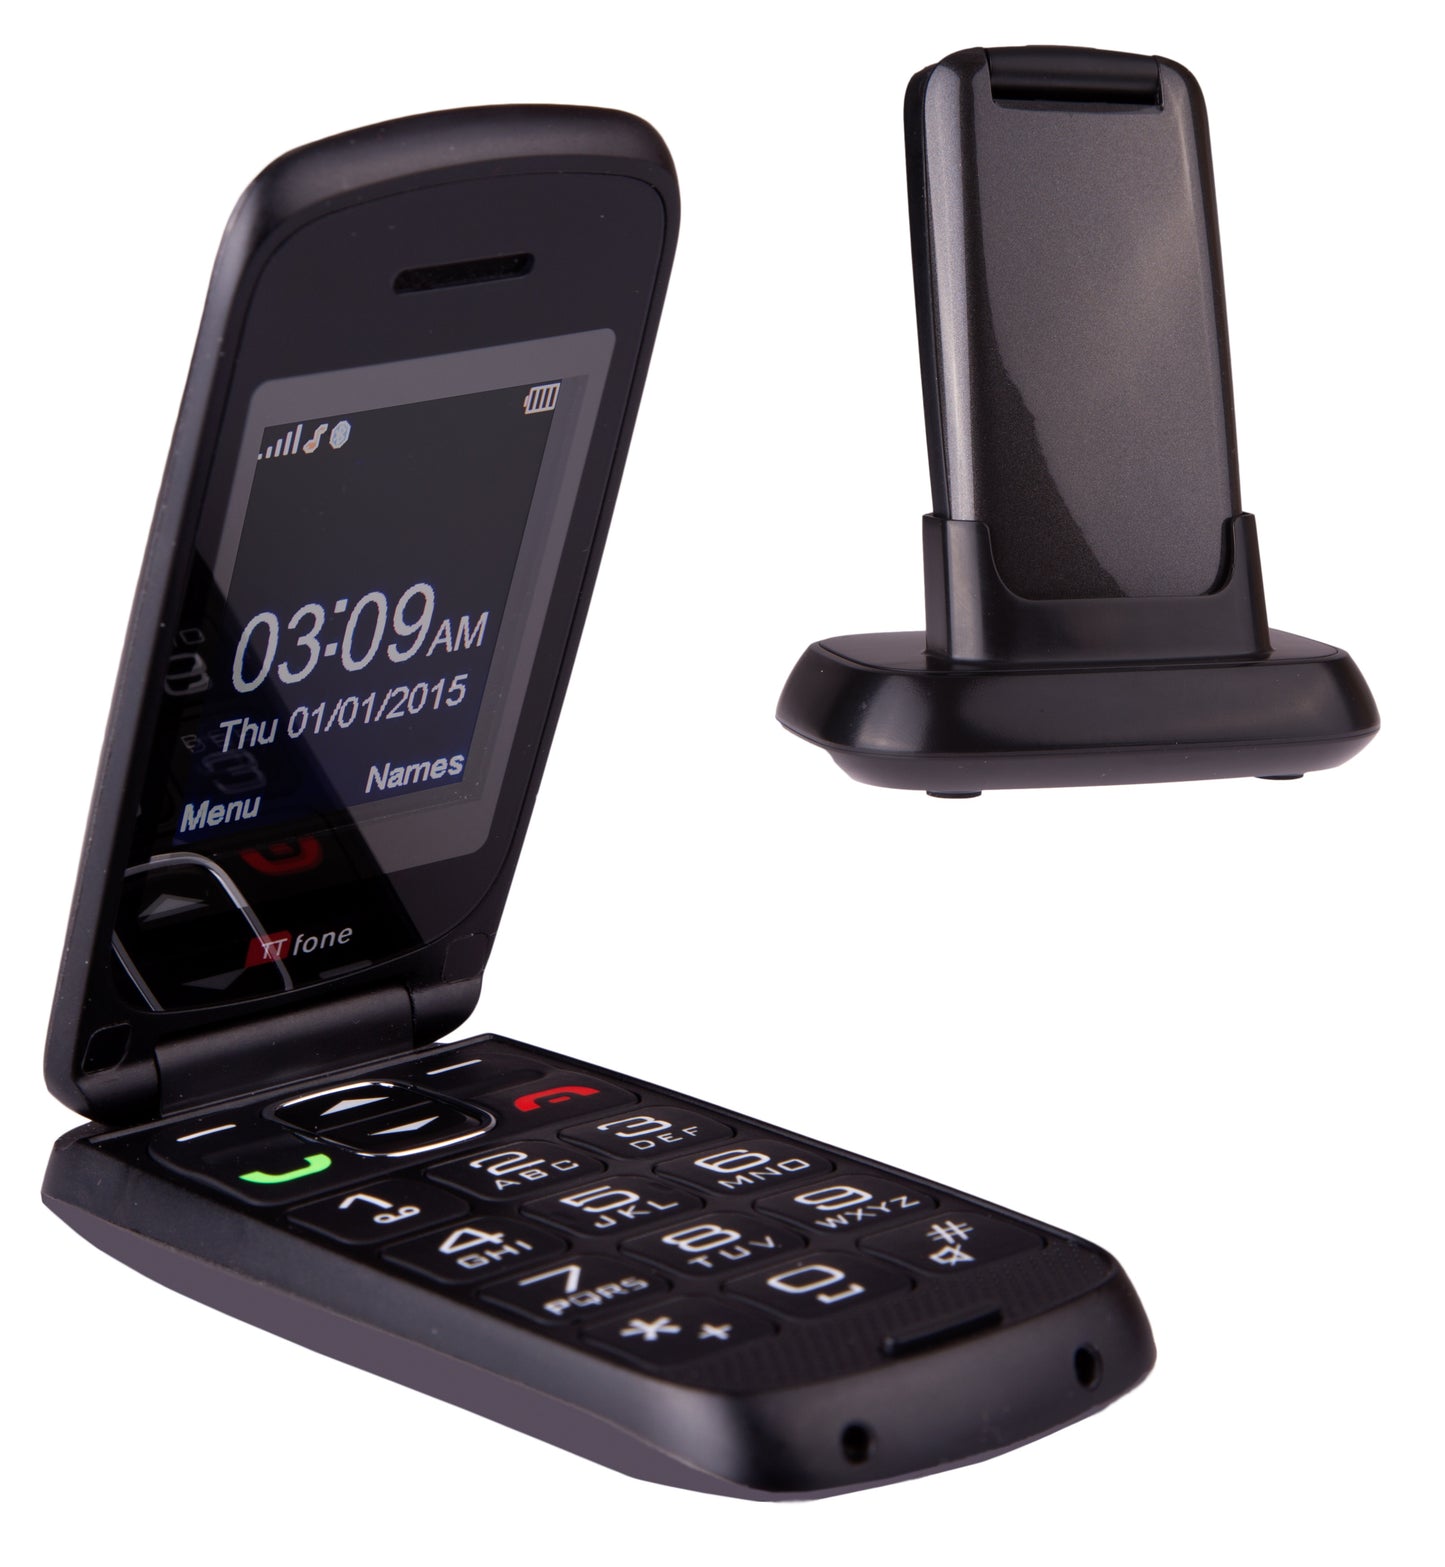 TTfone Grey Star TT300 - Warehouse Deals with EE Pay As You Go